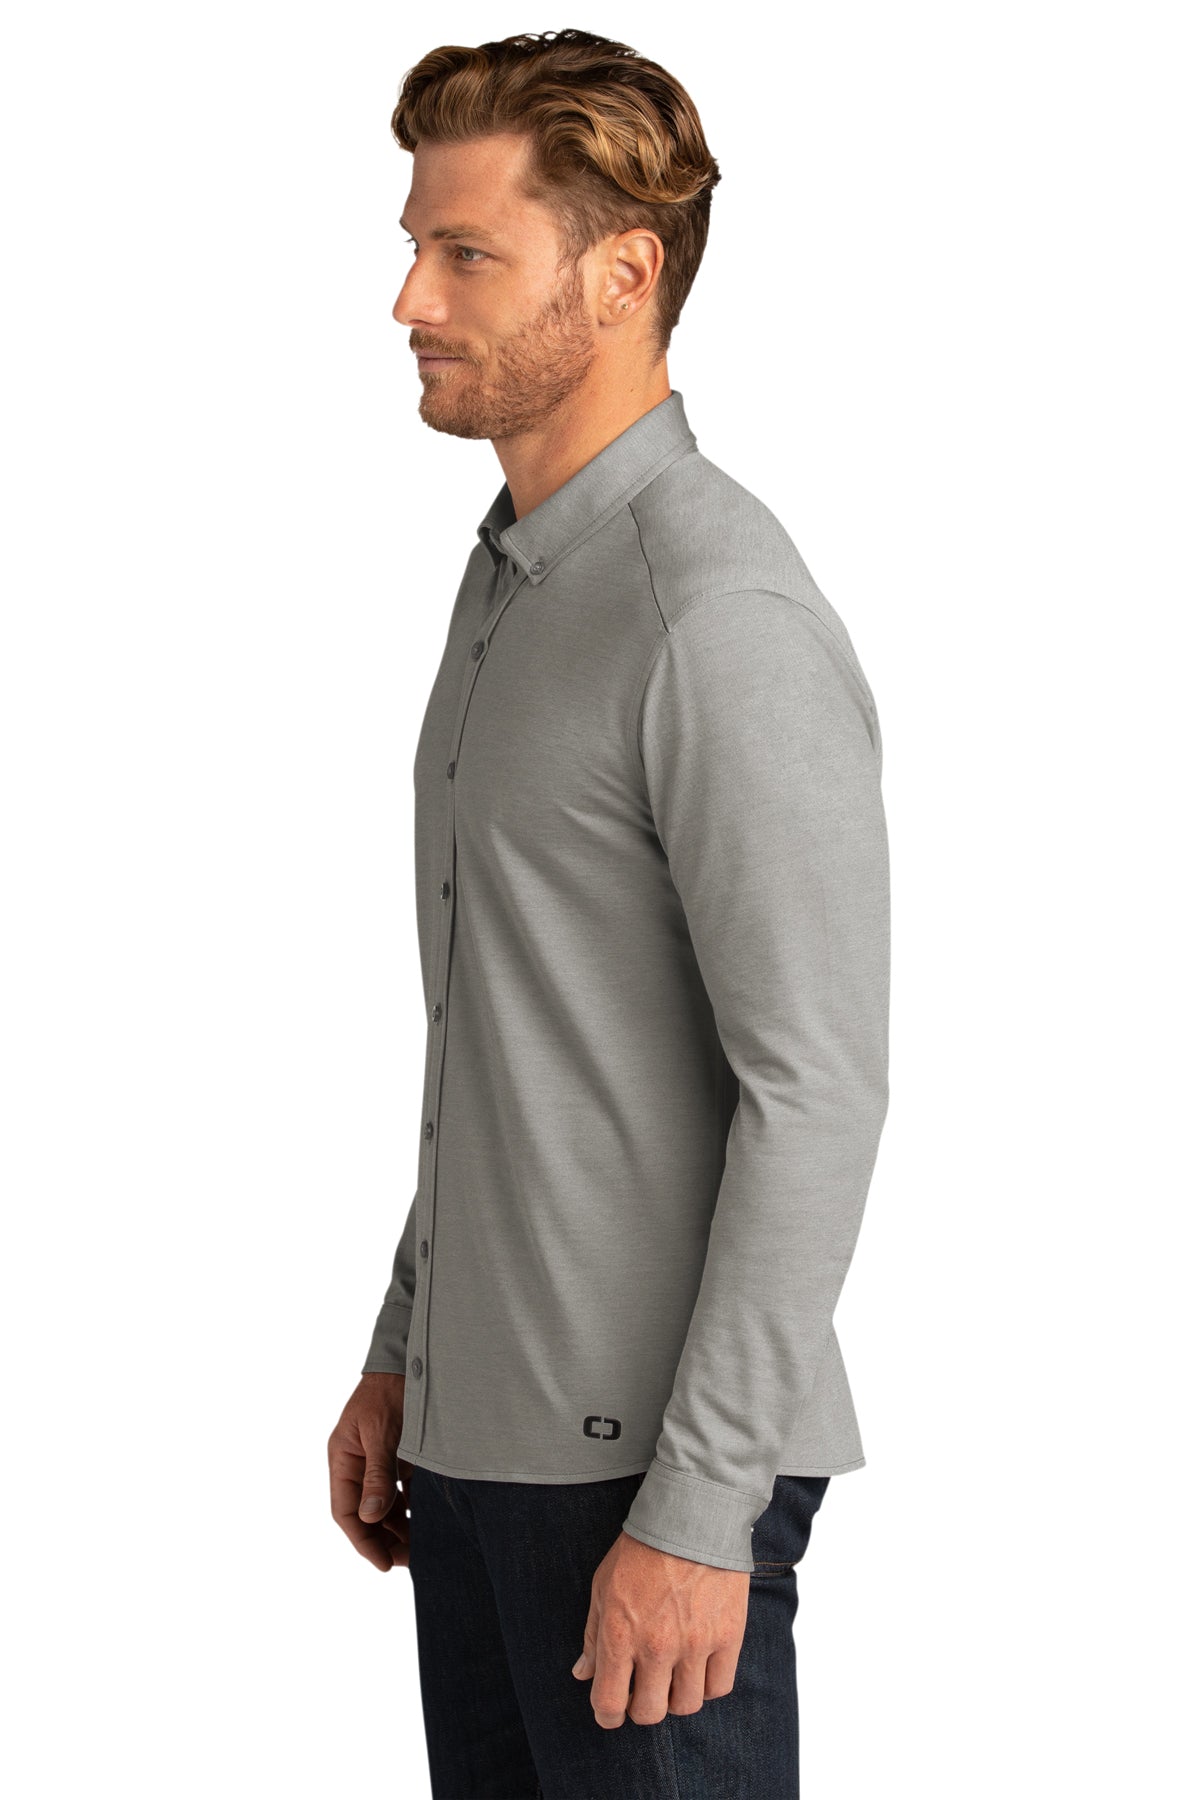 OGIO Code Stretch Long Sleeve Button-Up Tarmac Grey Heather